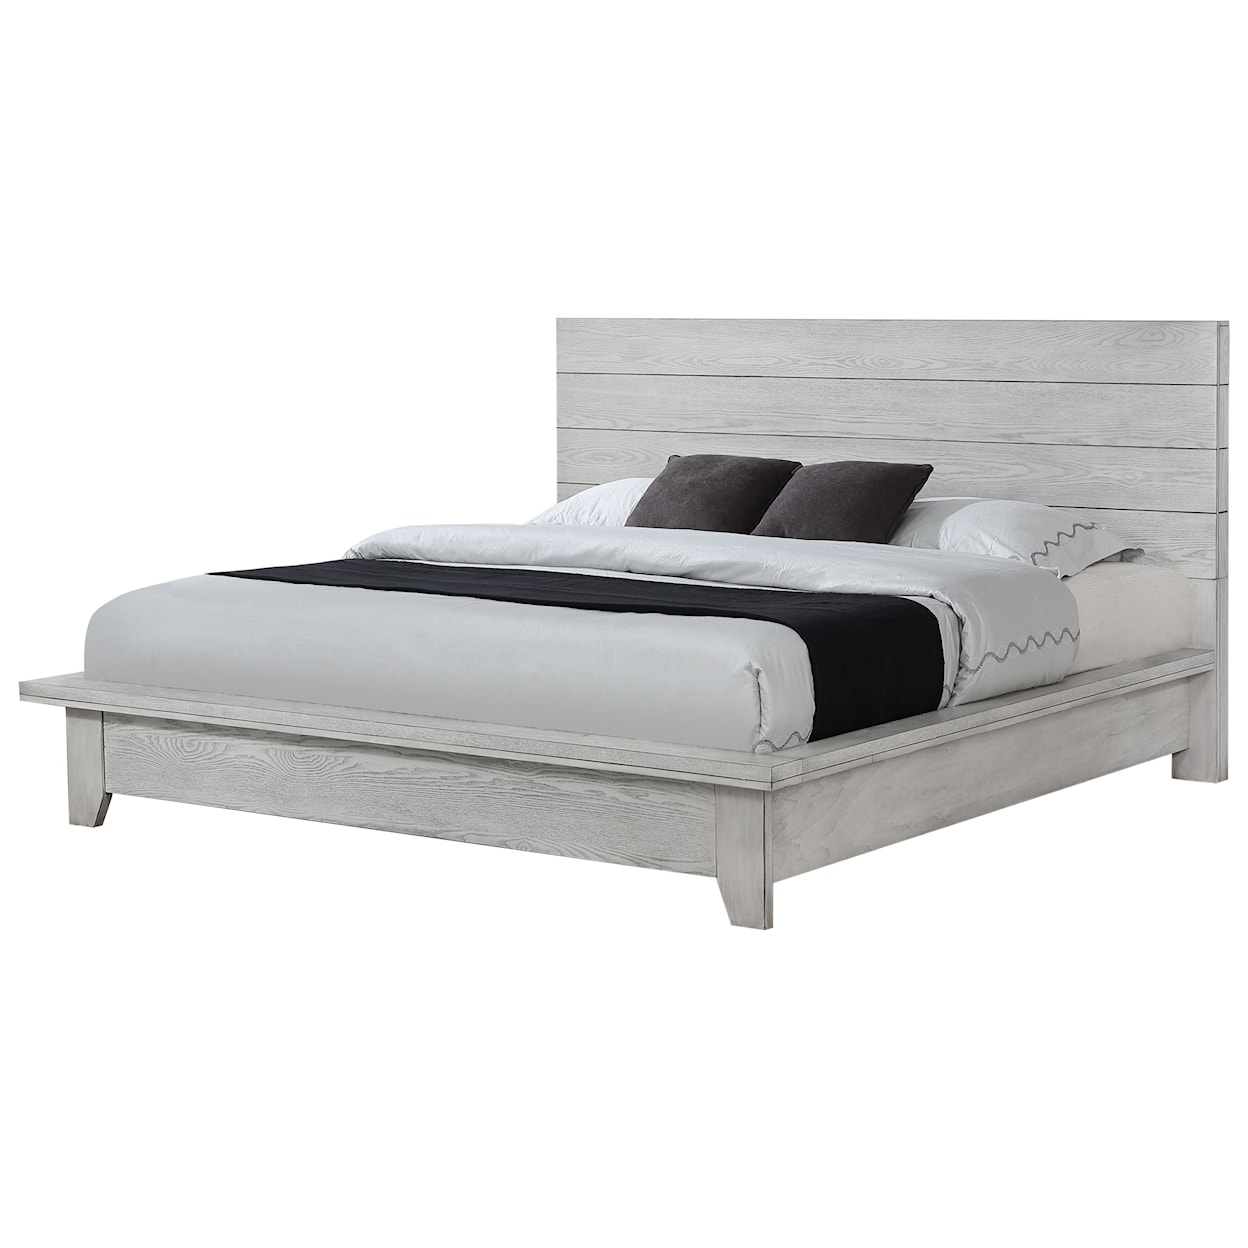 CM White Sands Queen Bed